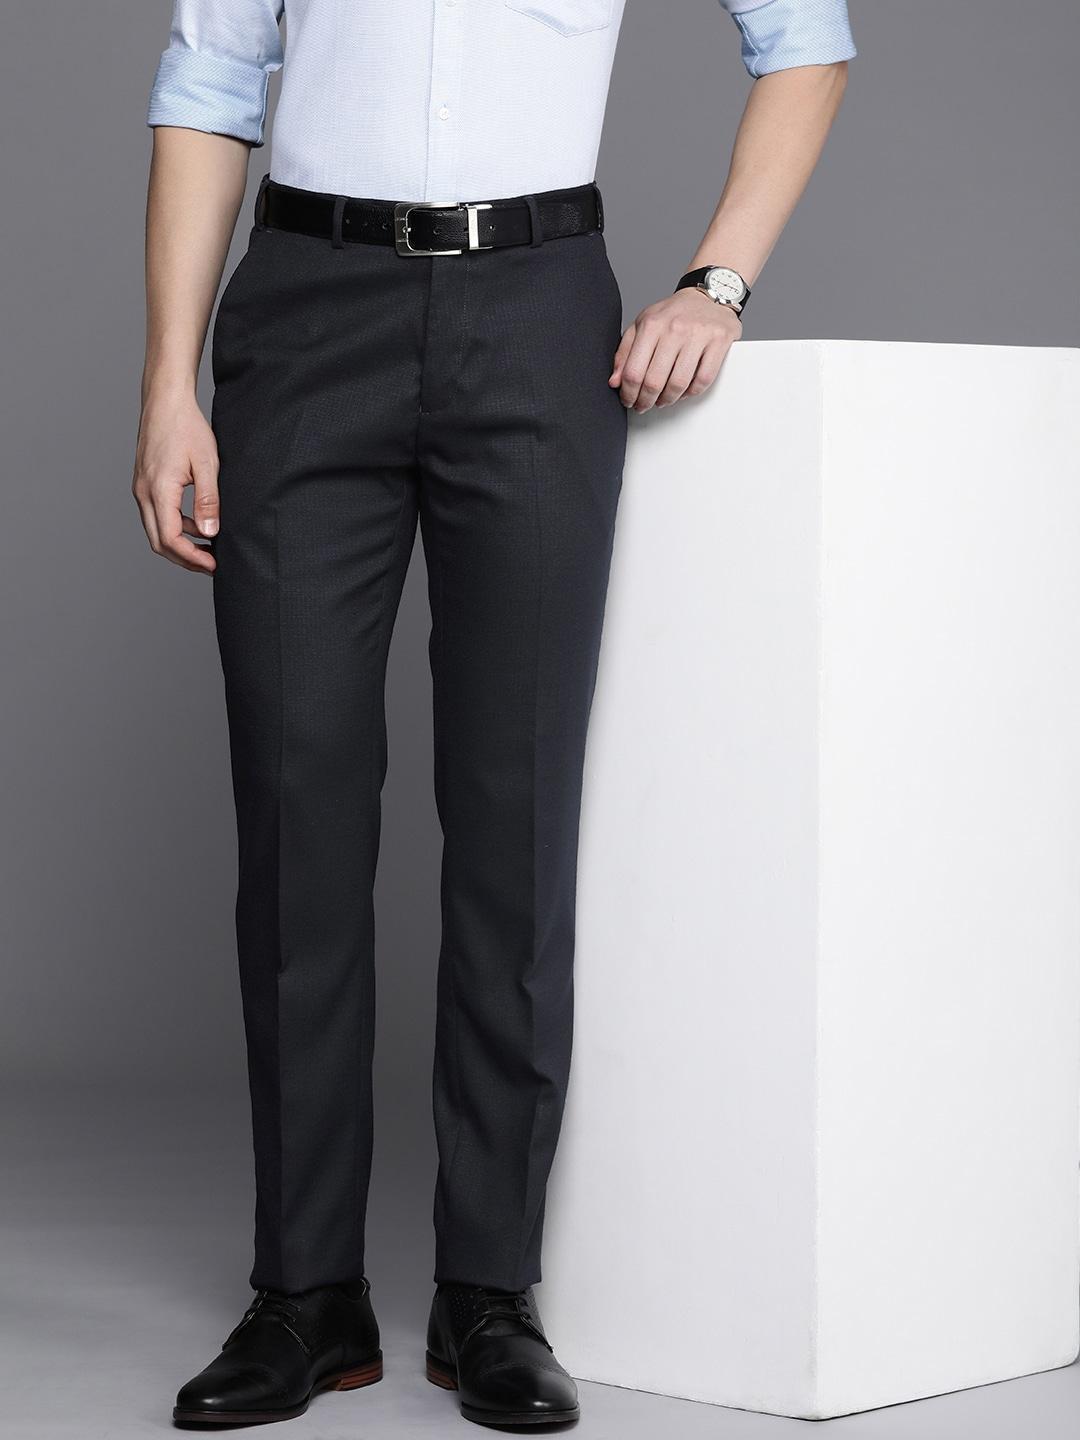 raymond-men-checked-slim-fit-formal-trousers